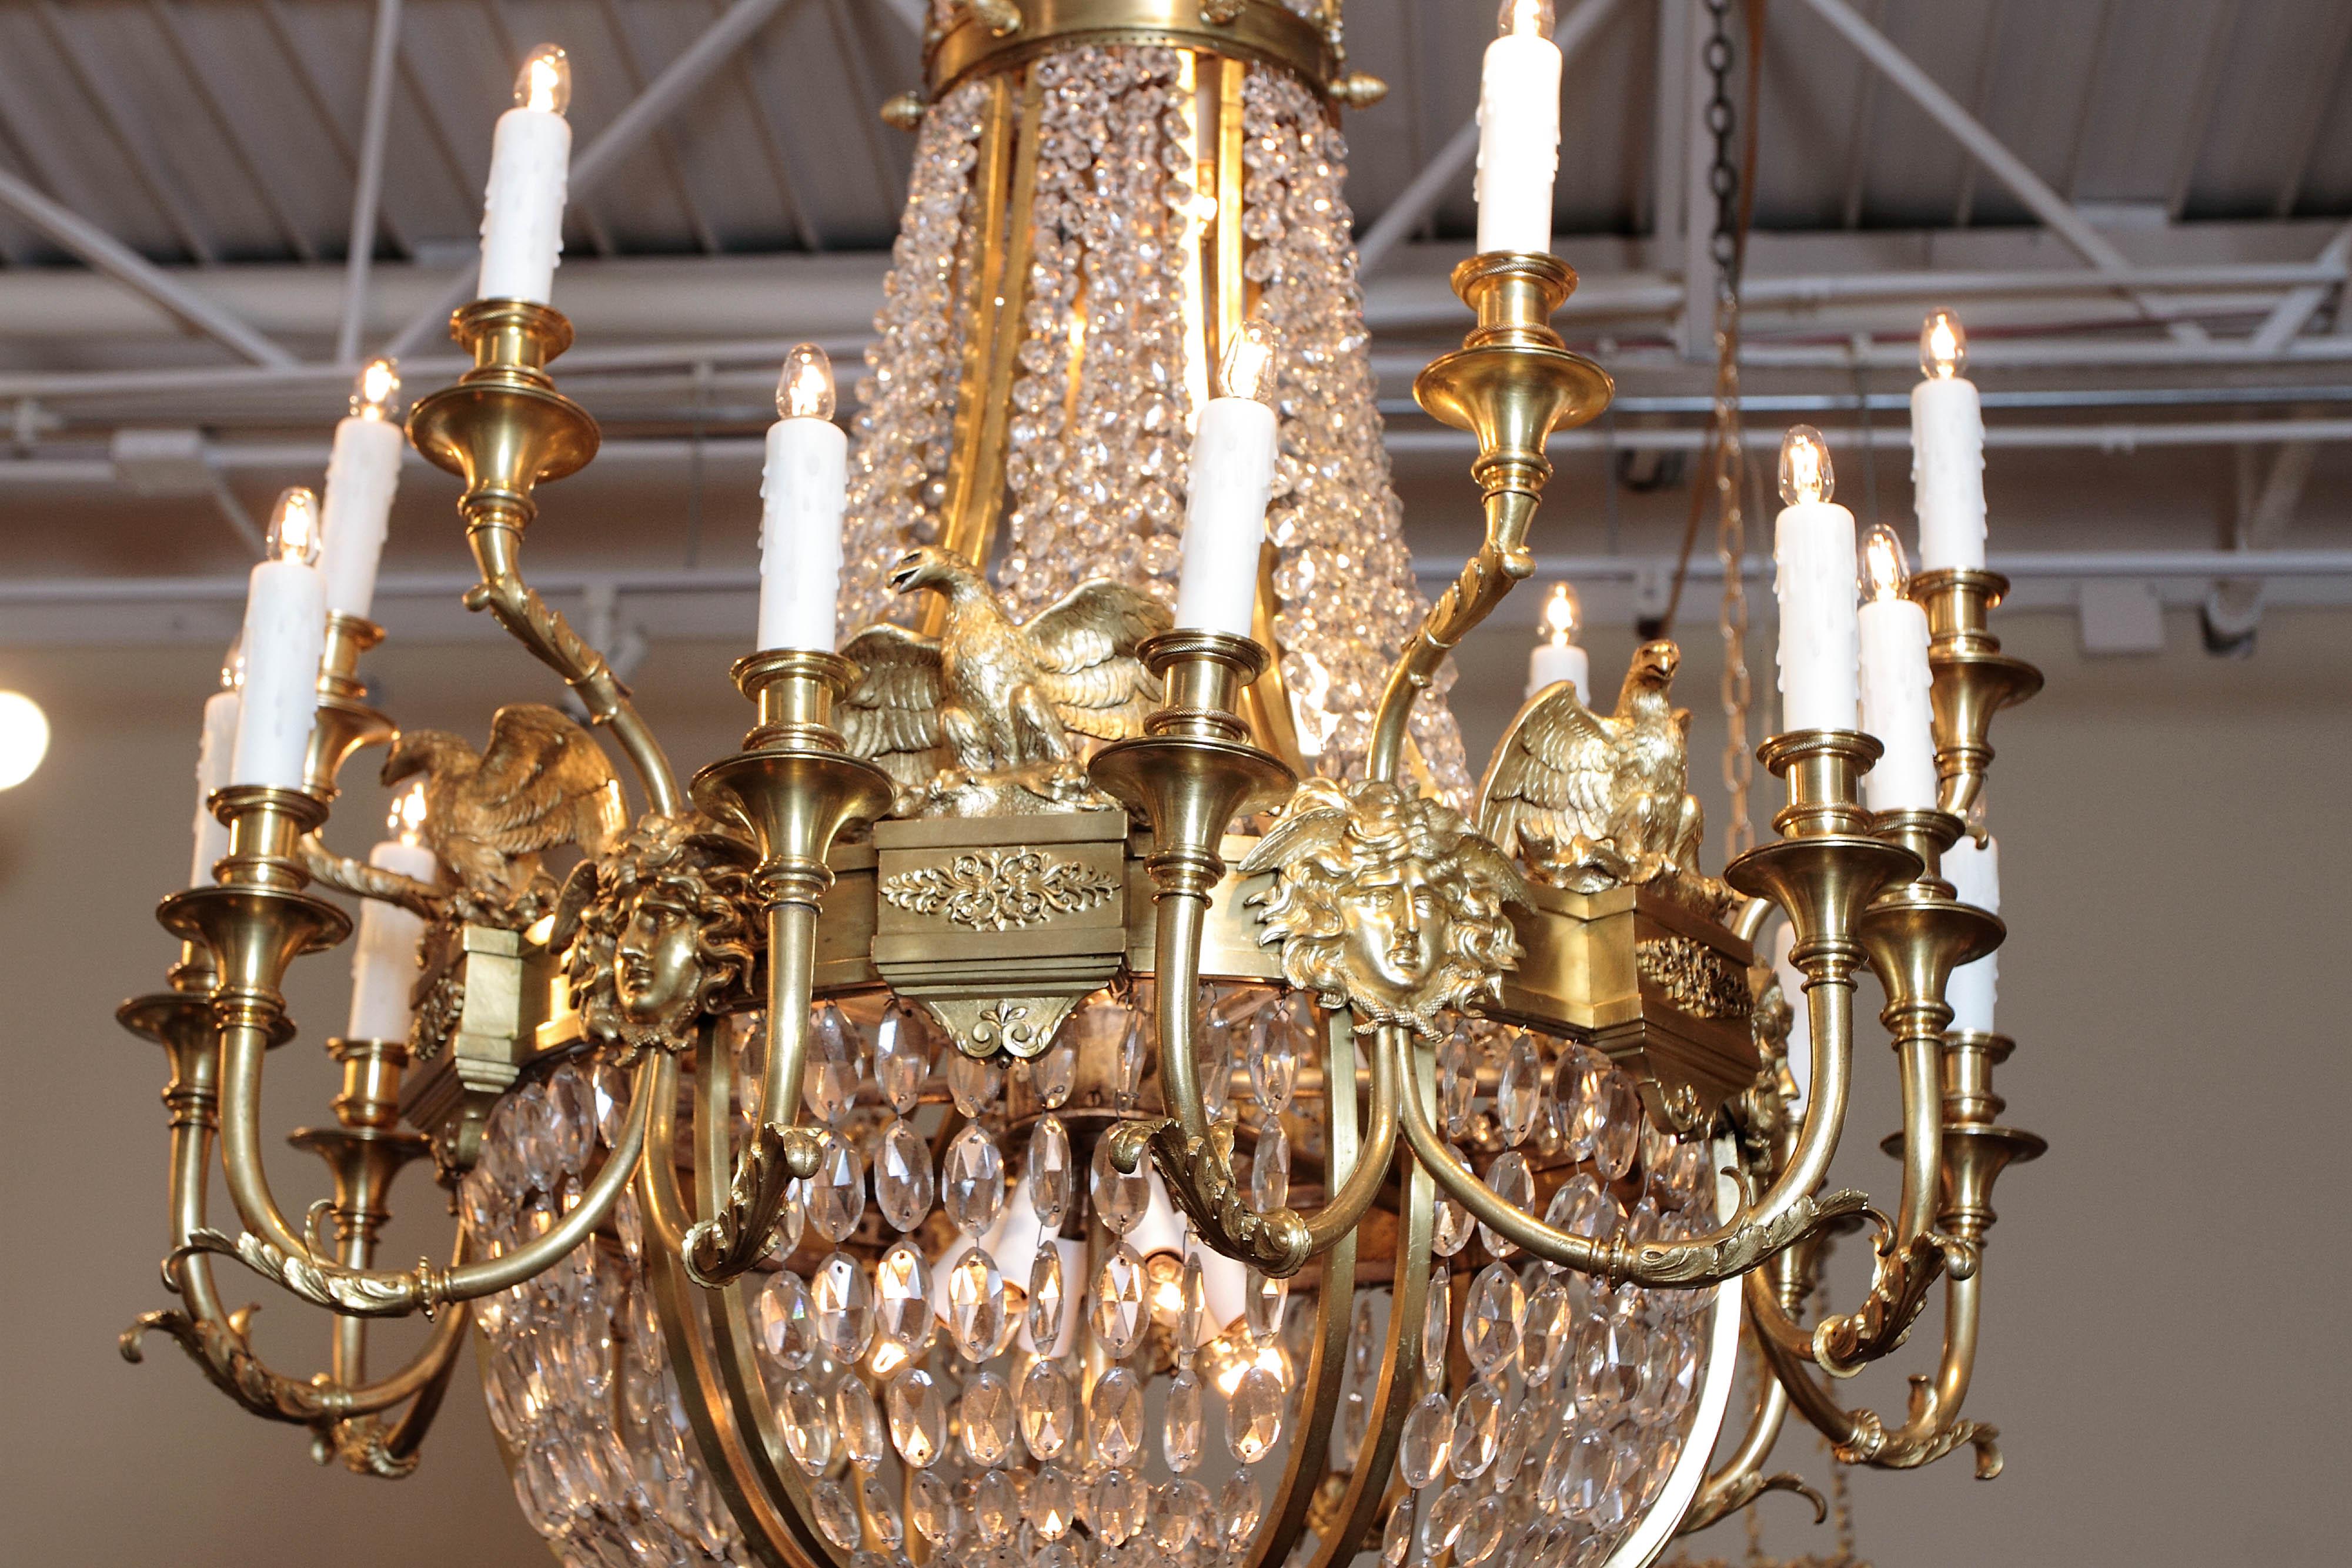 French Important late 19th c American Empire Cut Crystal and Bronze Doré Chandelier